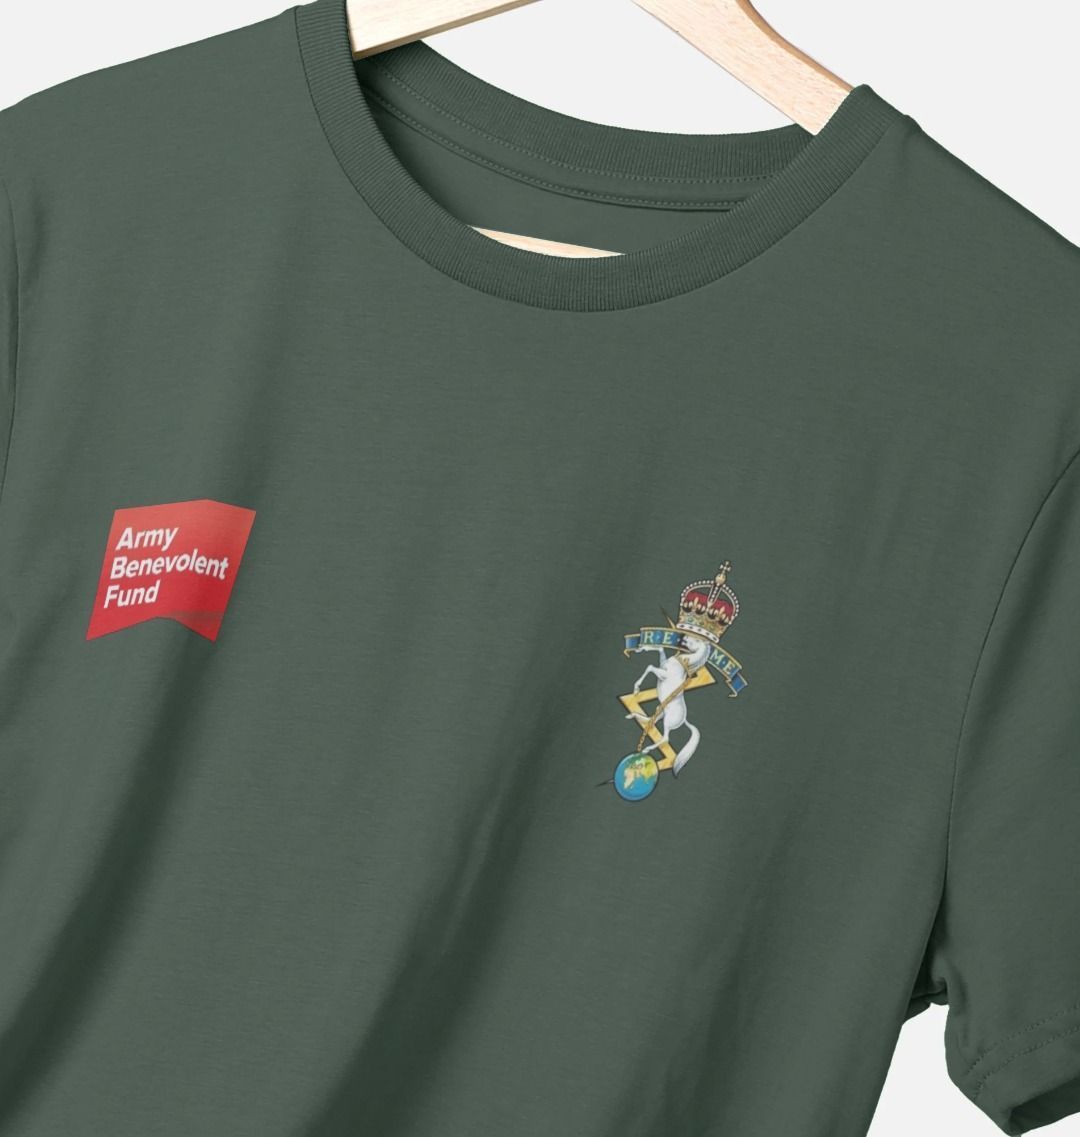 Corps of Royal Electrical and Mechanical Engineers Unisex T-shirt - Army Benevolent Fund